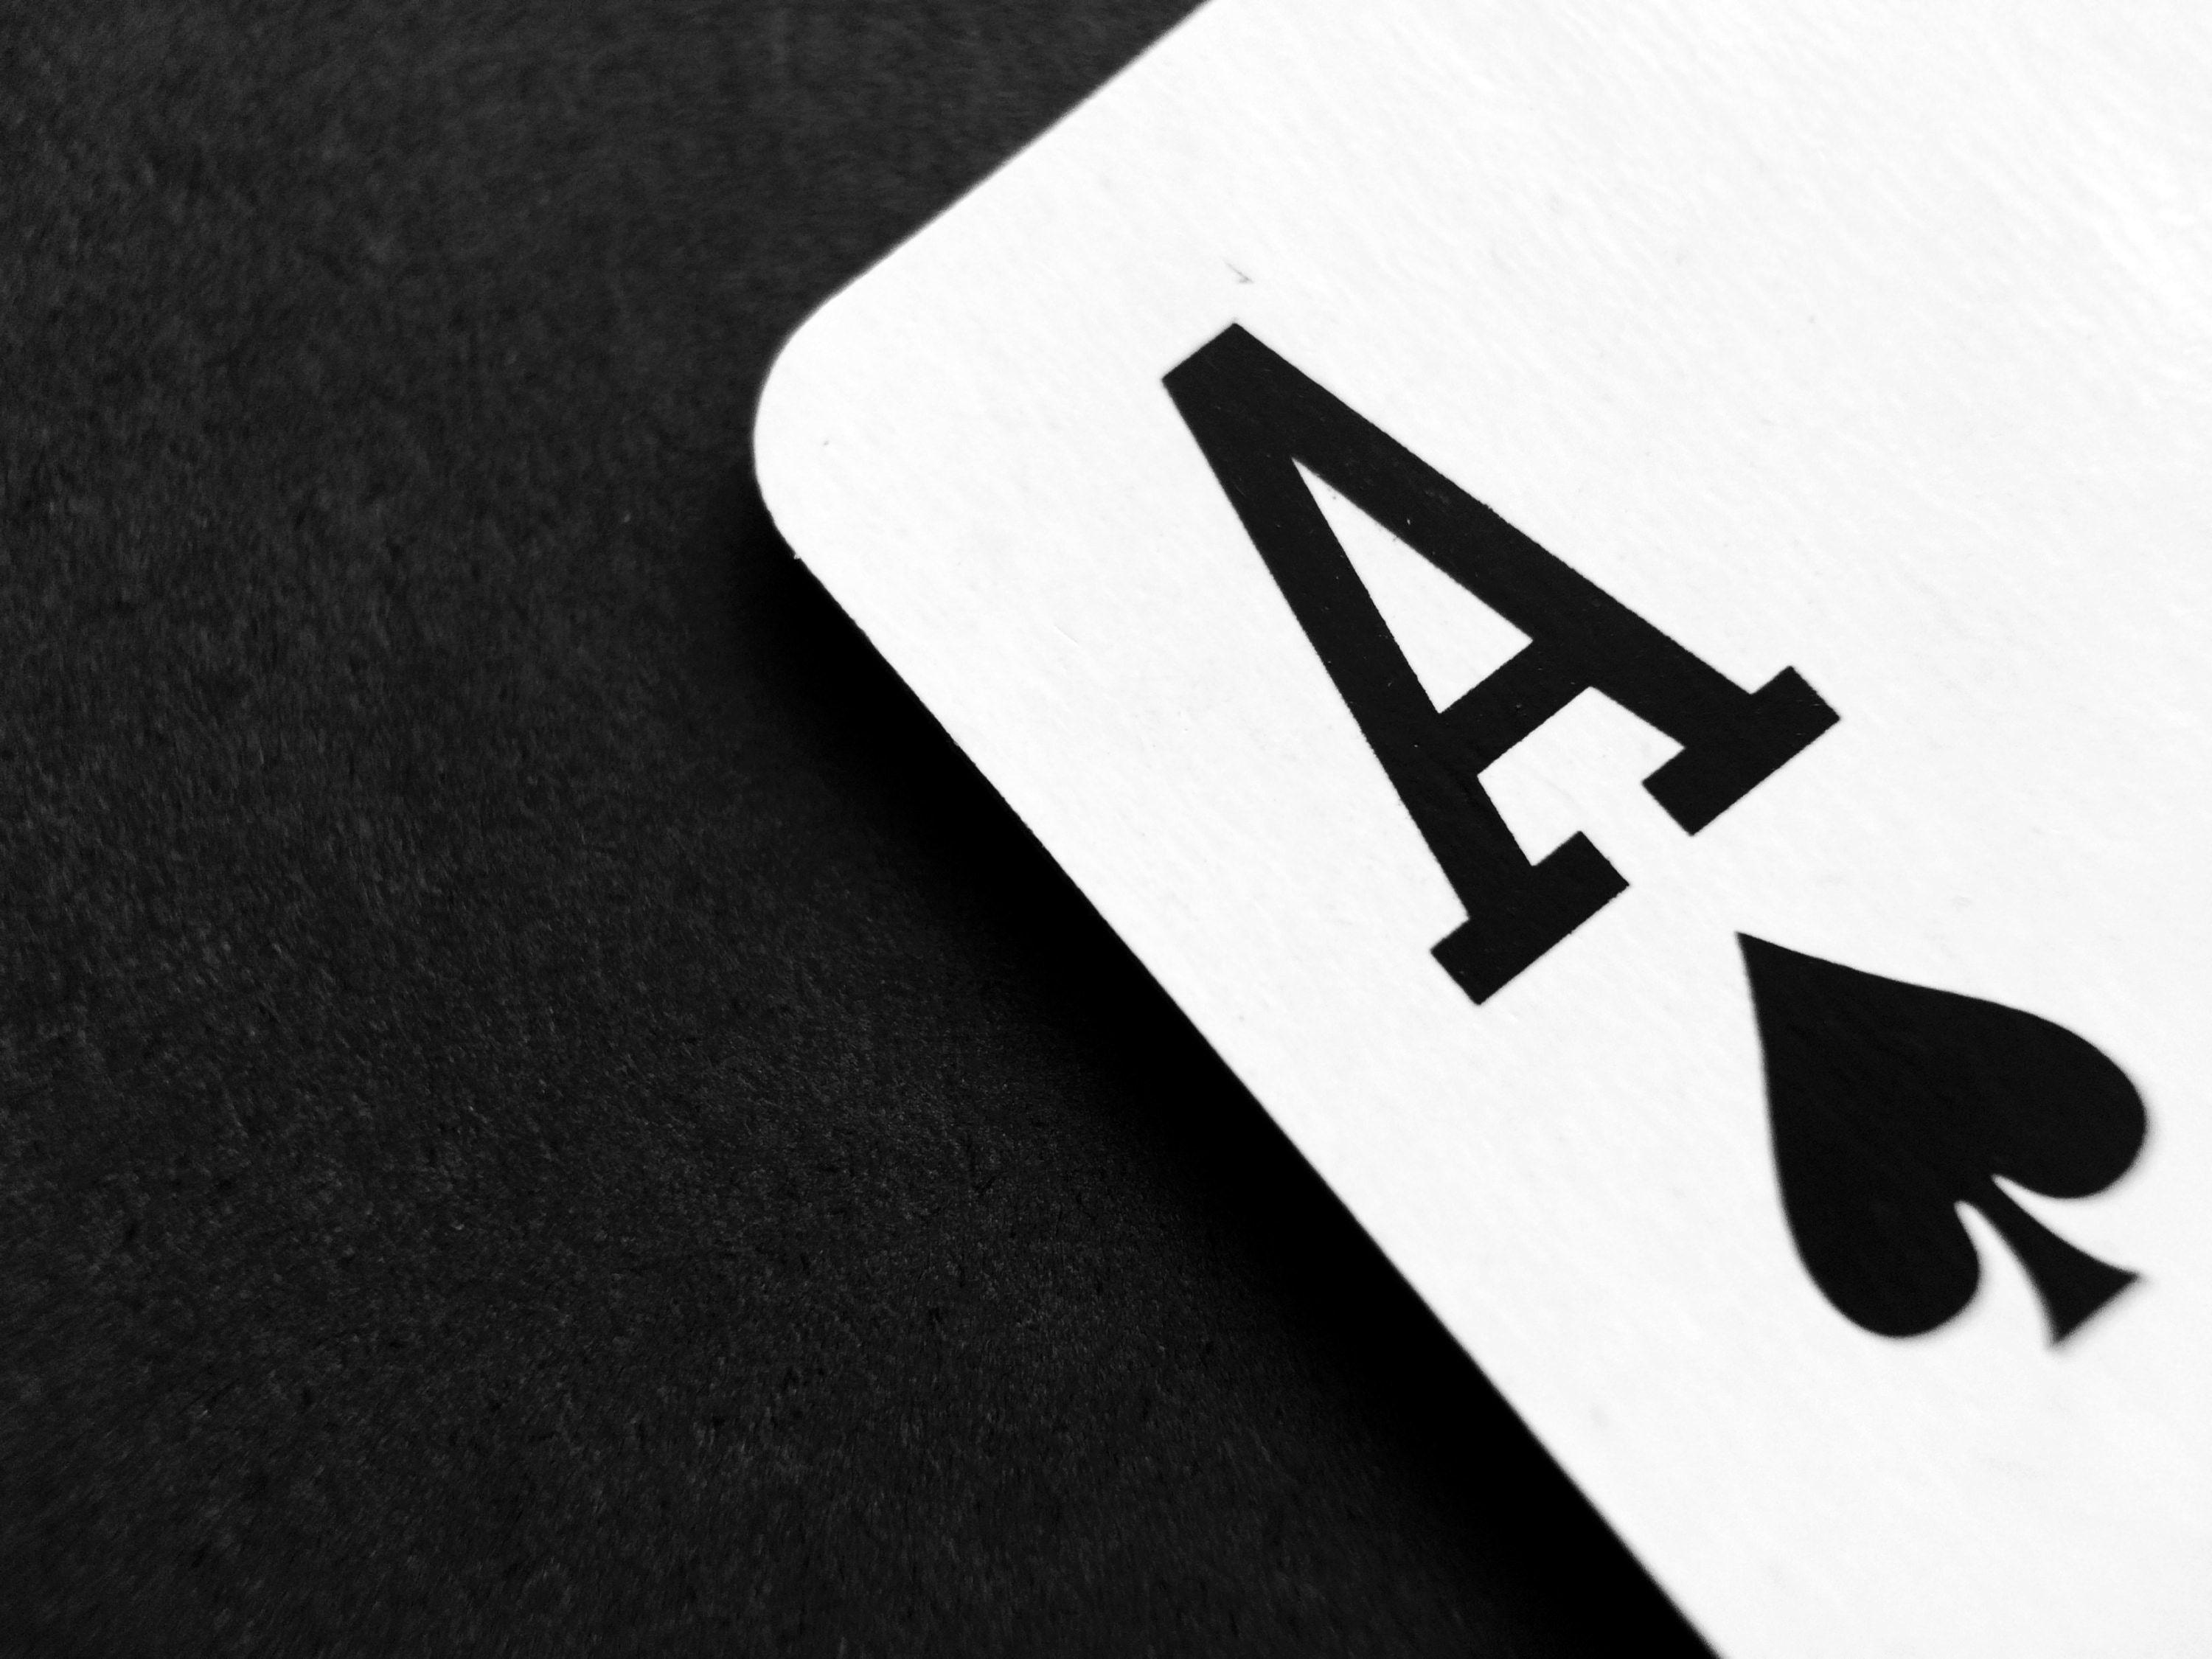 ace of spade playing card free image